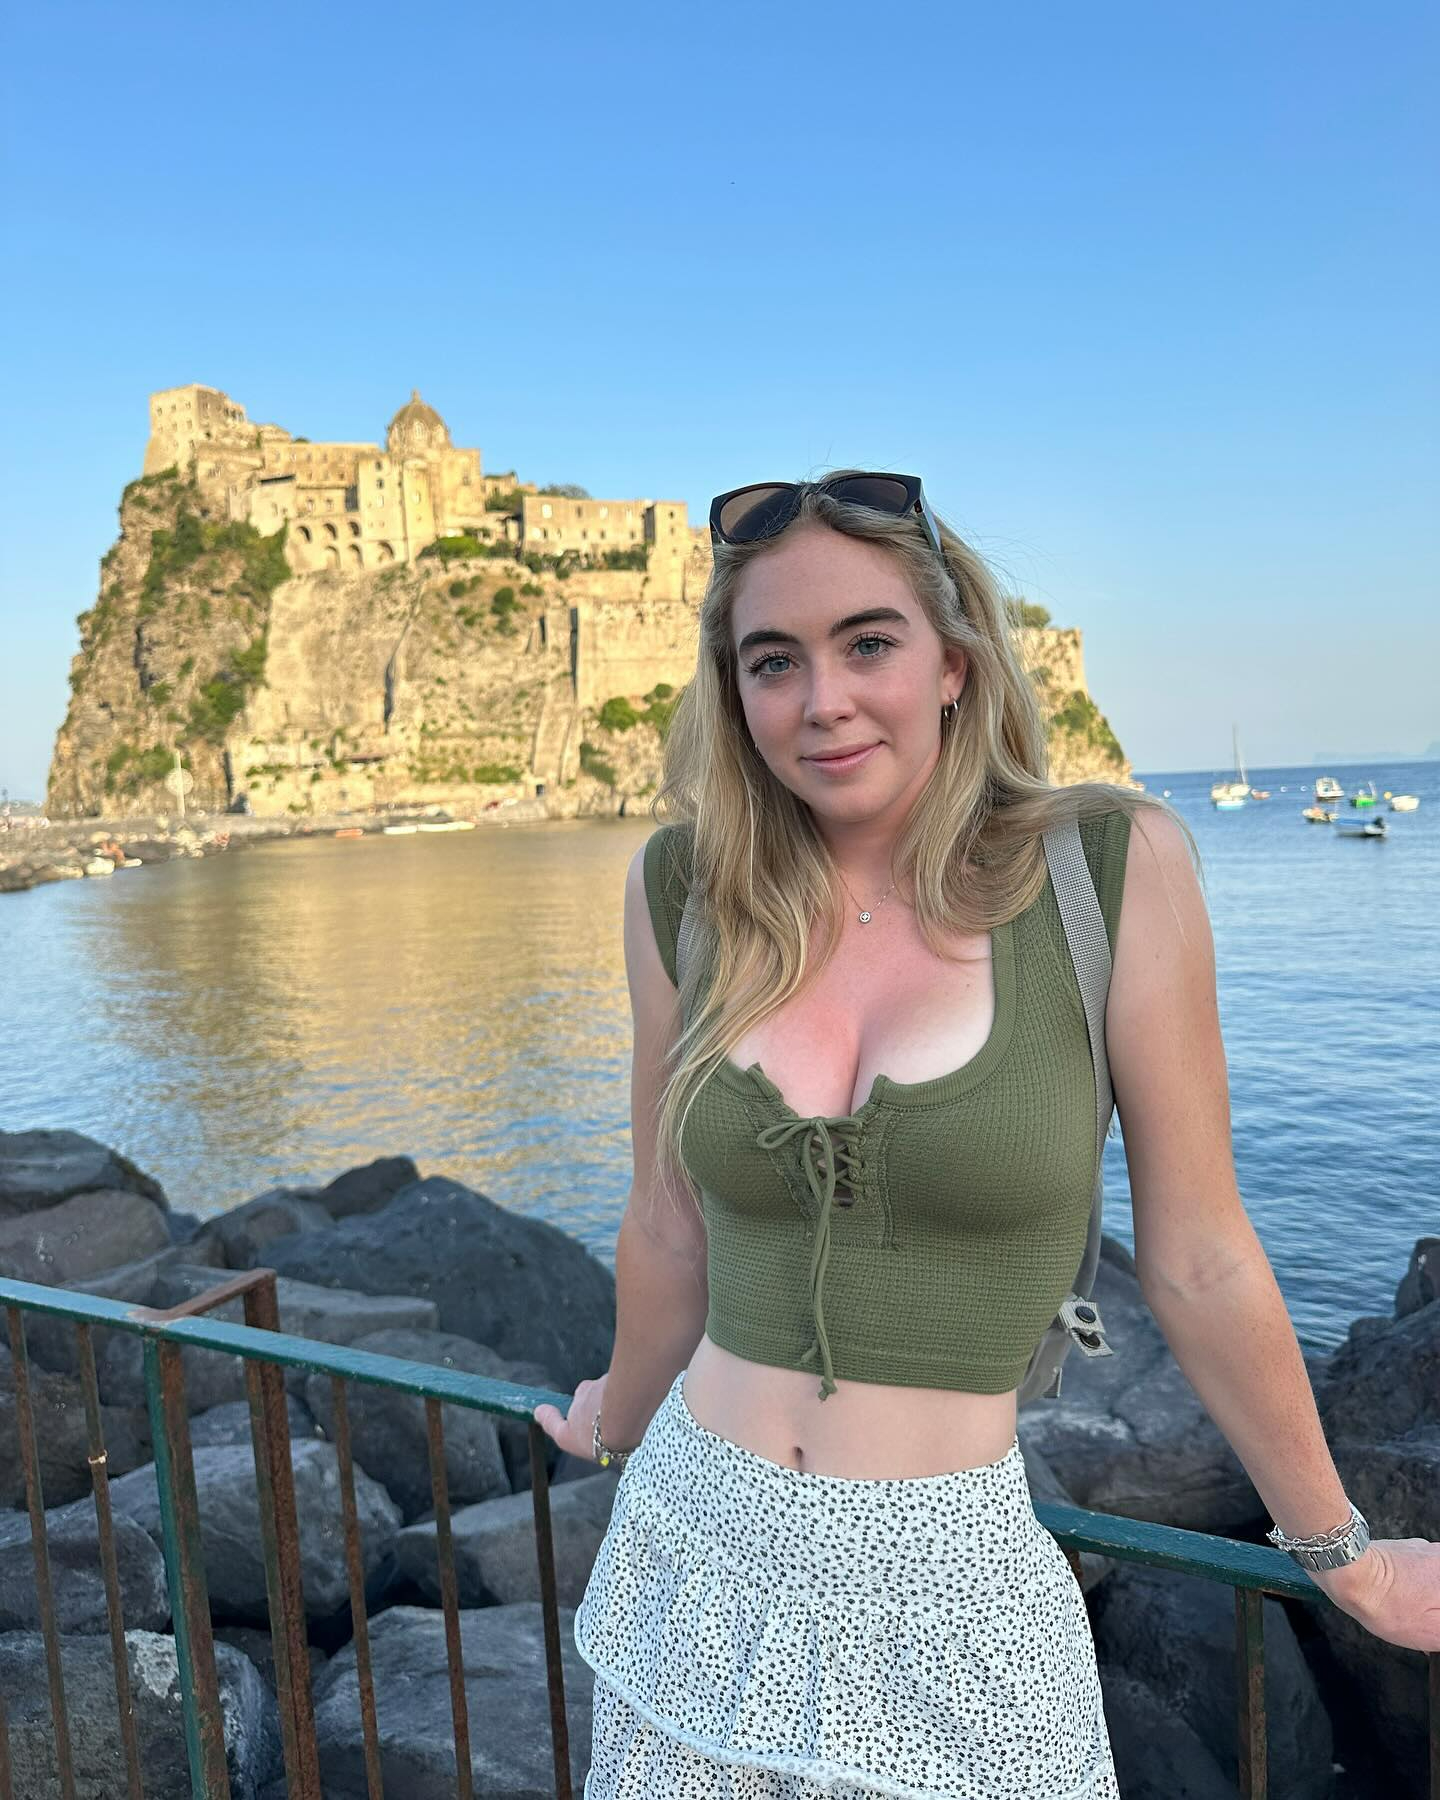 She enjoyed a long vacation in Italy late last year